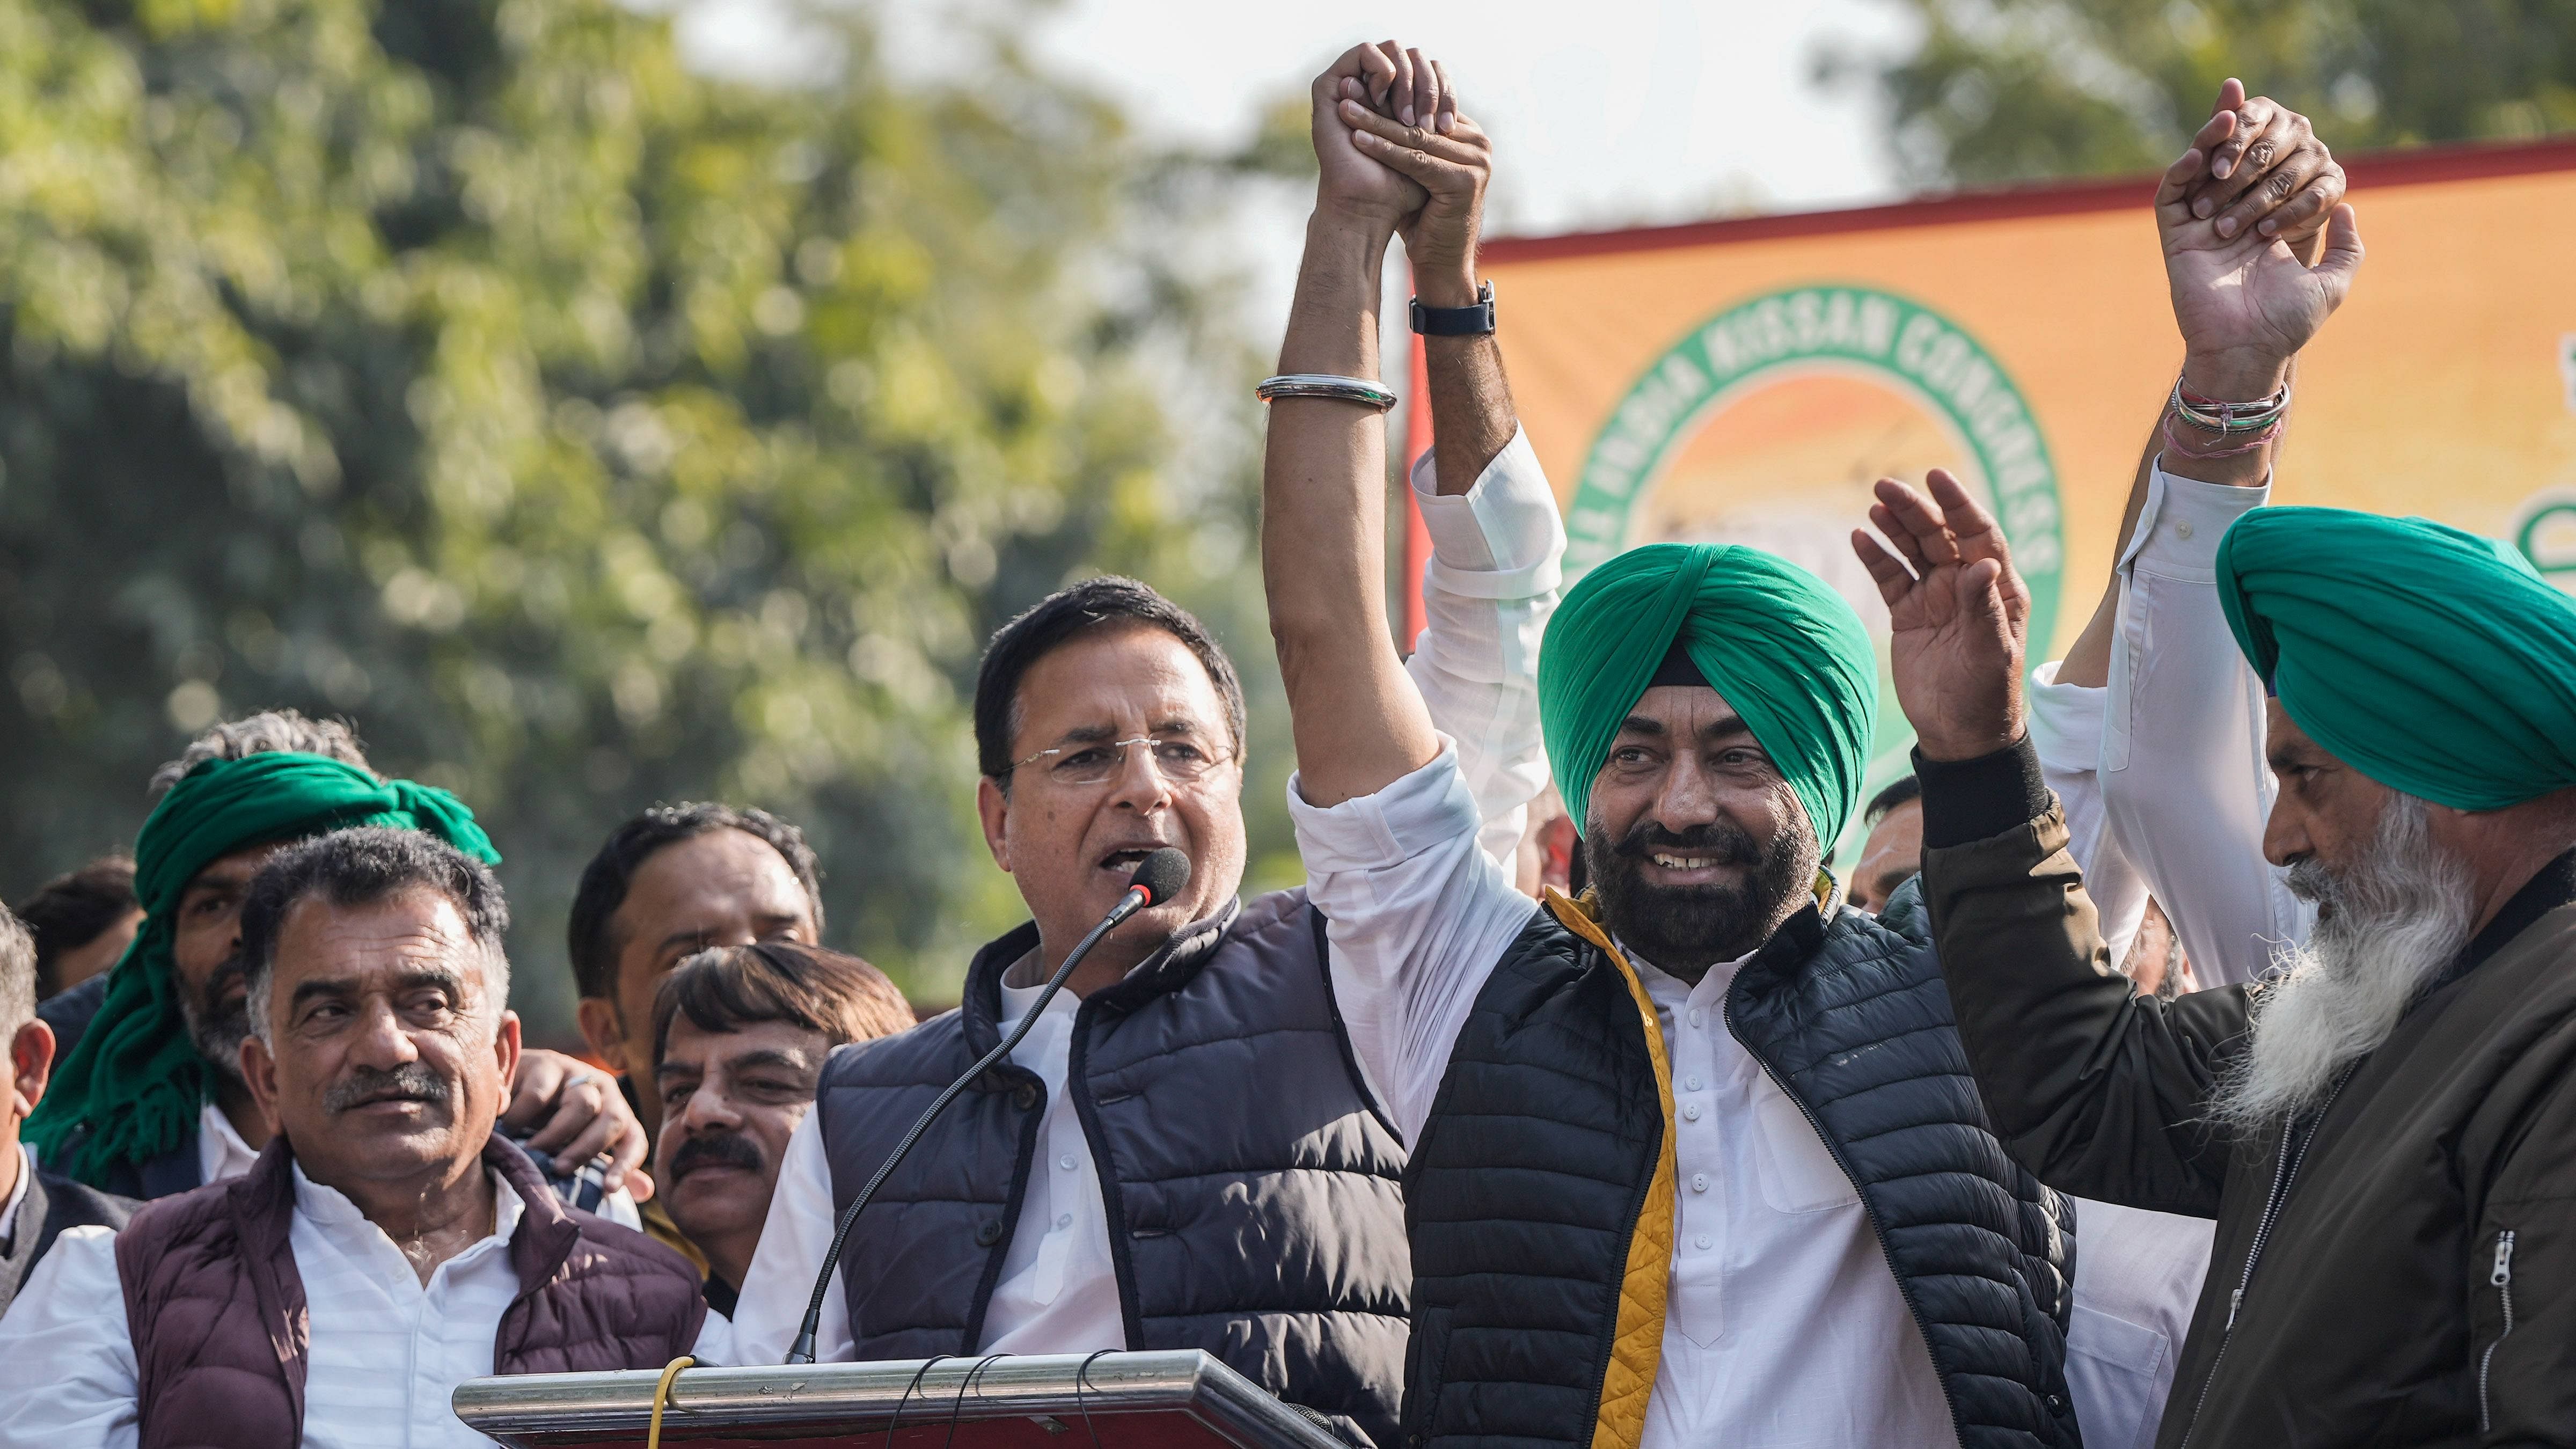 Chairman of All India Kisan Congress and MLA Sukhpal Singh Khaira with Congress leader Randeep Surjewala at a day-long protest over demand of the long-pending issues of farmers including making minimum support price (MSP) a legal right, at Jantar Mantar in New Delhi. Credit: PTI Photo